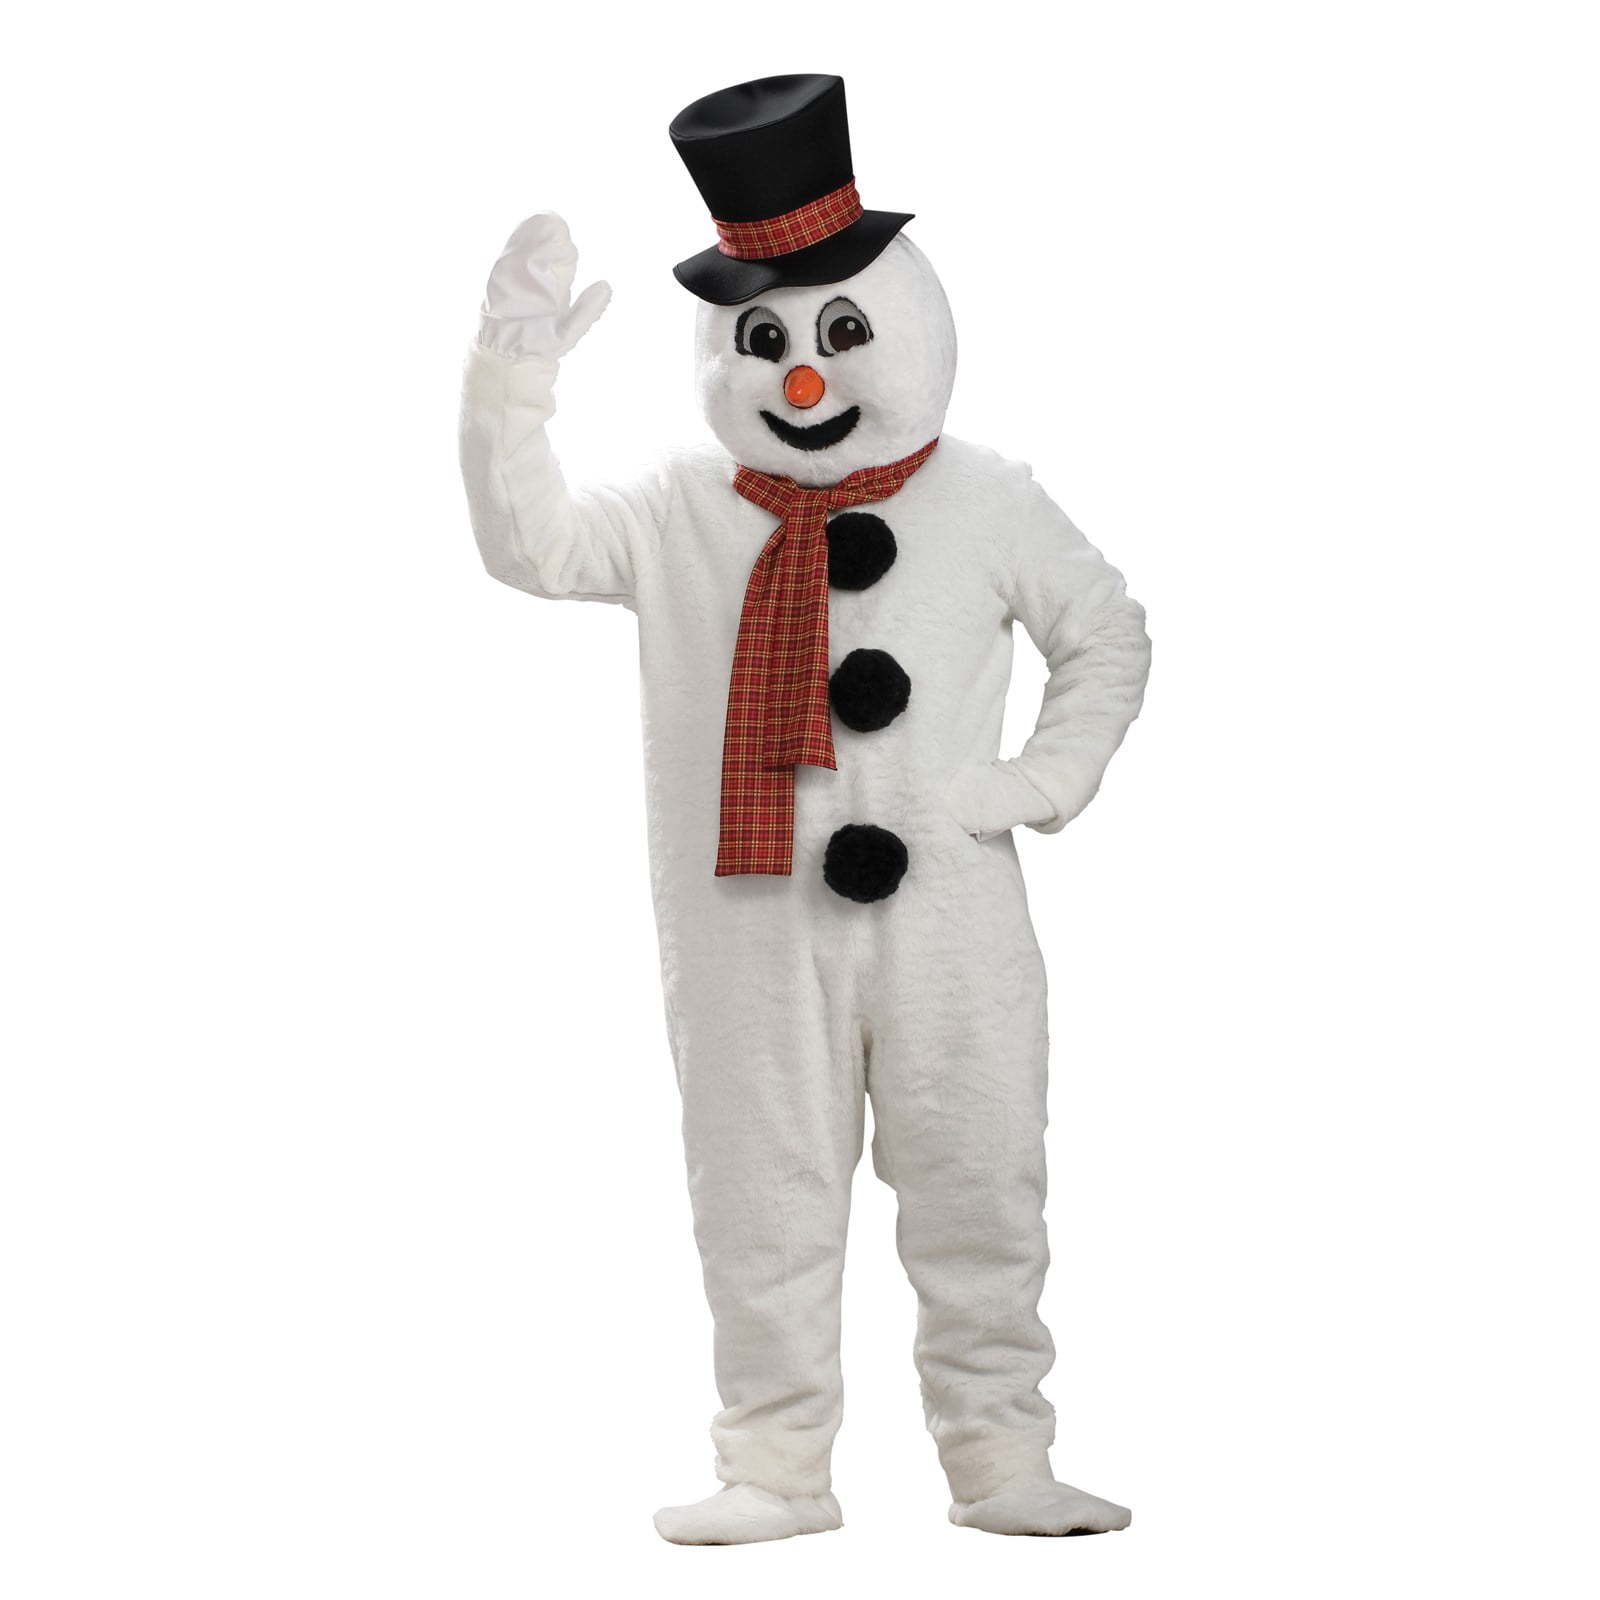 Details about   Snowman Mascot Costume Suits Cosplay Party Game Outfits Advertising Promotion us